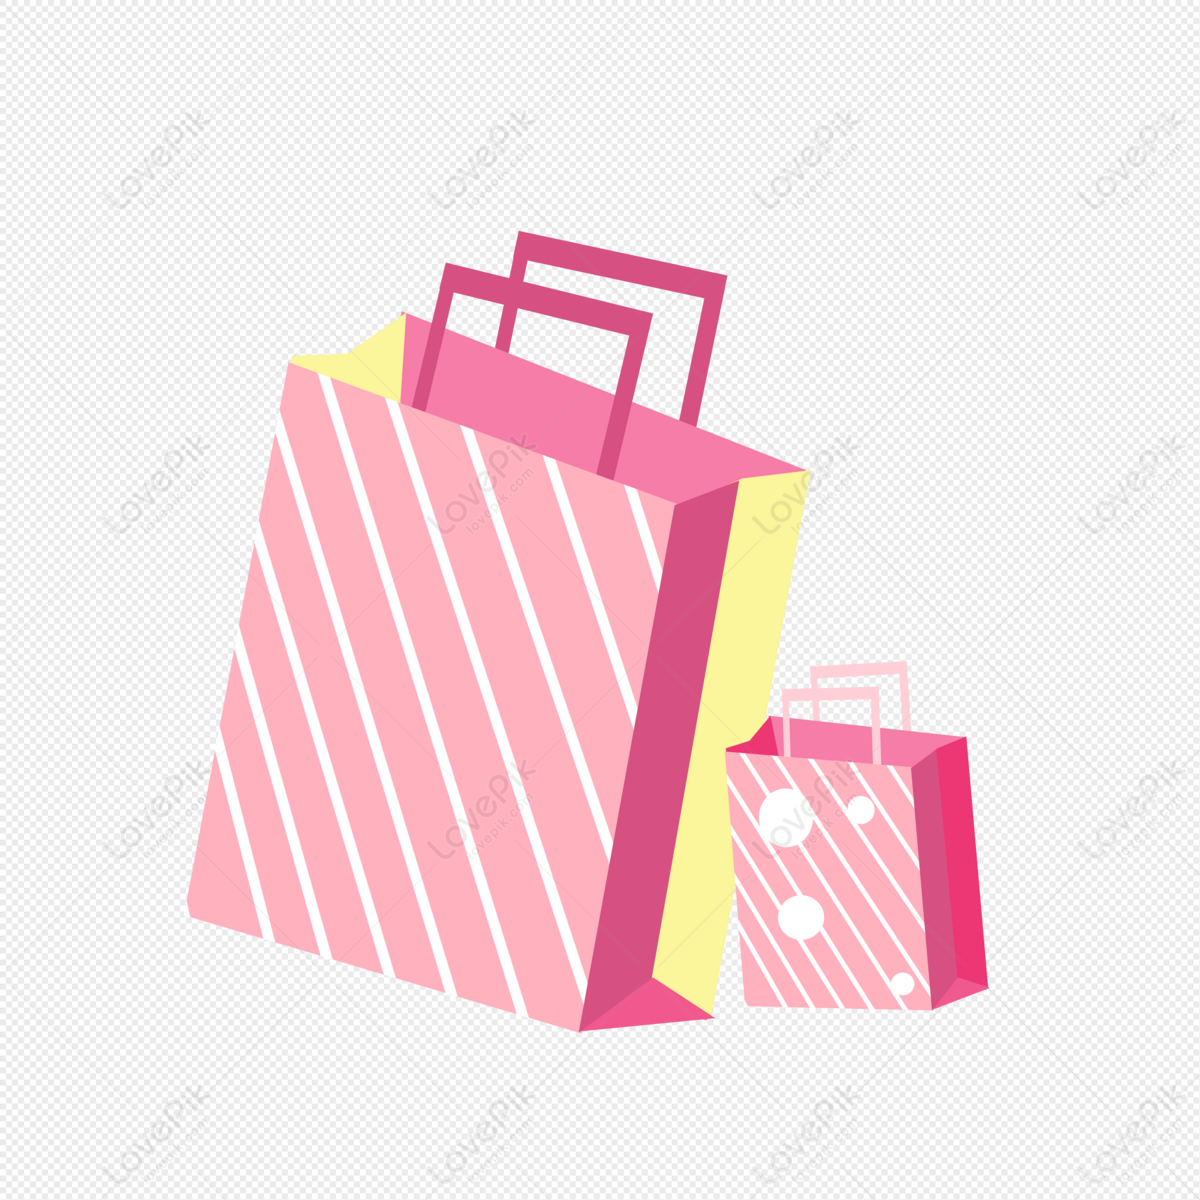 Gift Bags Transparent background 15100053 PNG